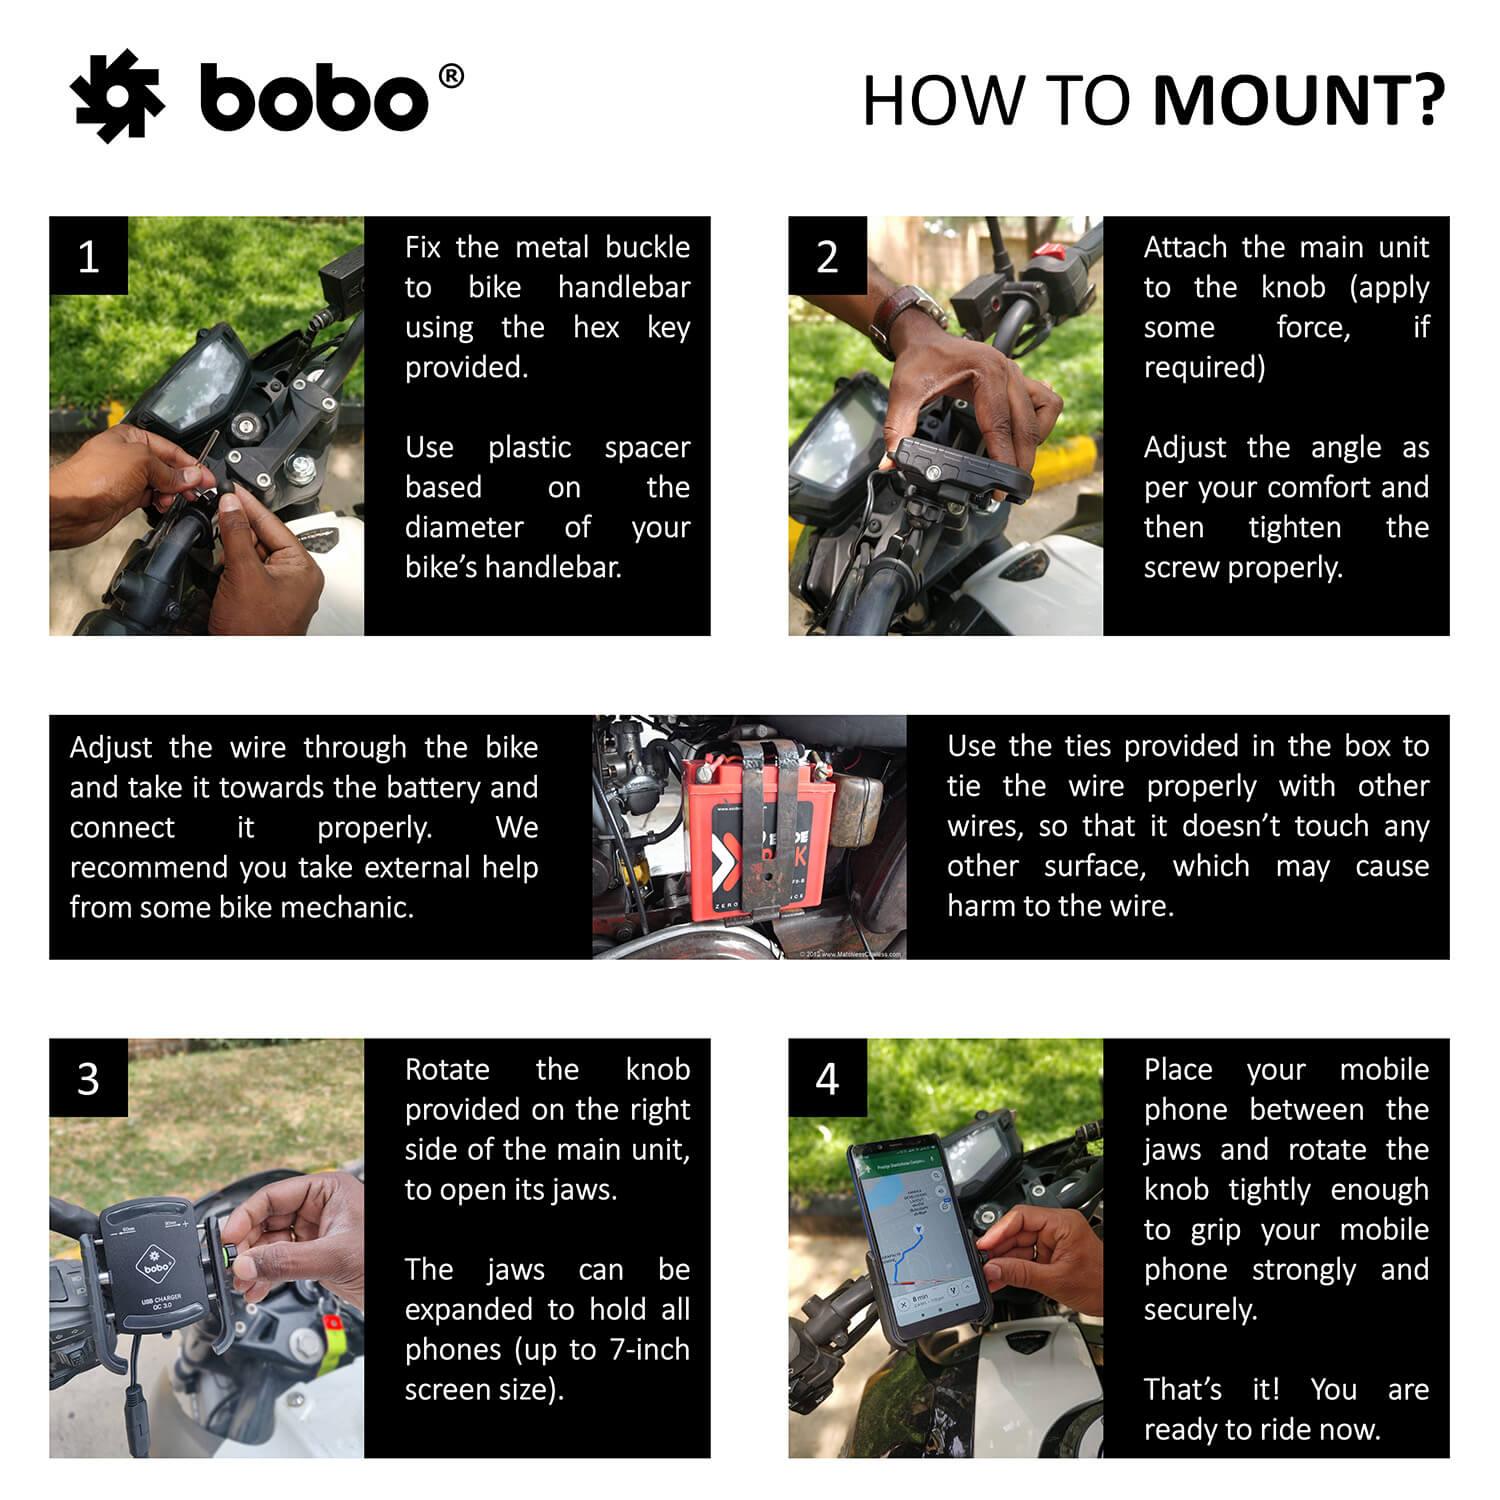 BOBO BM1 PRO Jaw-Grip Bike Phone Holder (with fast USB 3.0 charger, SAE connector & Fast USB Cable) - Autosparz